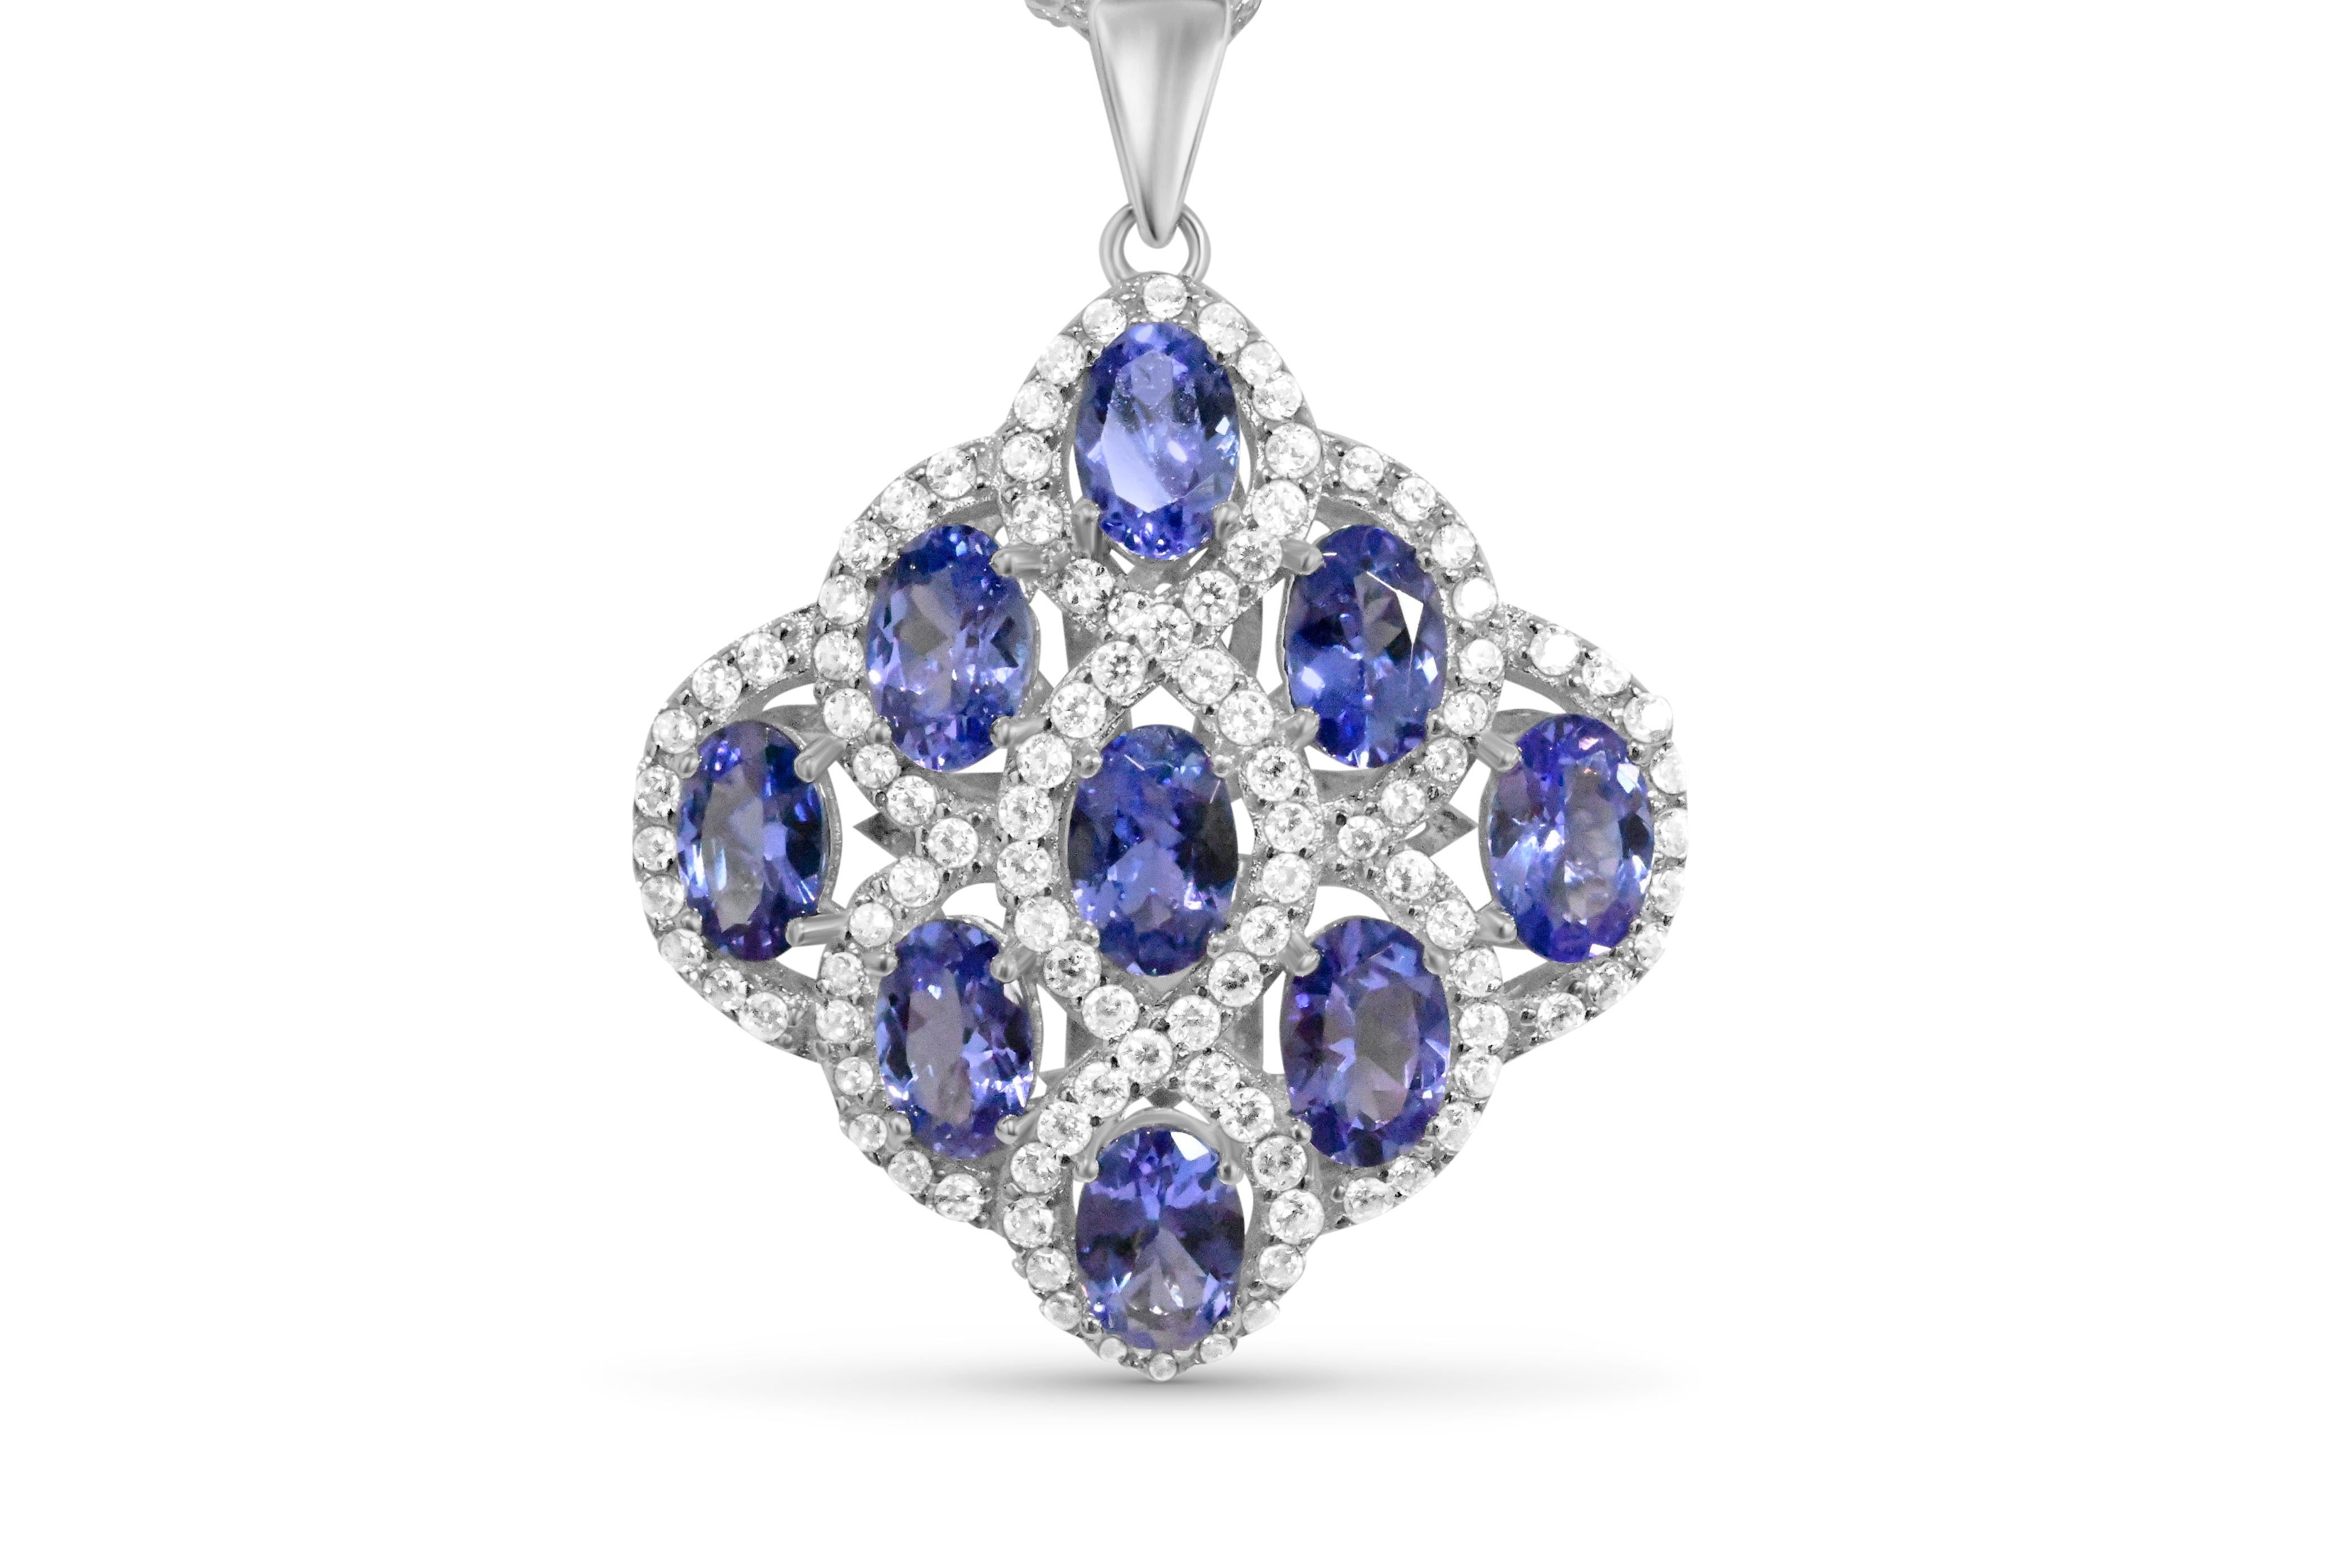 Tanzanite 925 Rhodium  Metal Platted Women's Pendant 4.06cts
Primary Stone : Tanzanite
Stone Shape: 6 x 4mm Oval
Stone Weight : 4.05cts
No of Stone: 9 pieces
Metal Weight : 3.88g 

Secondary Stone: White CZ
No of Stone: 100 pieces